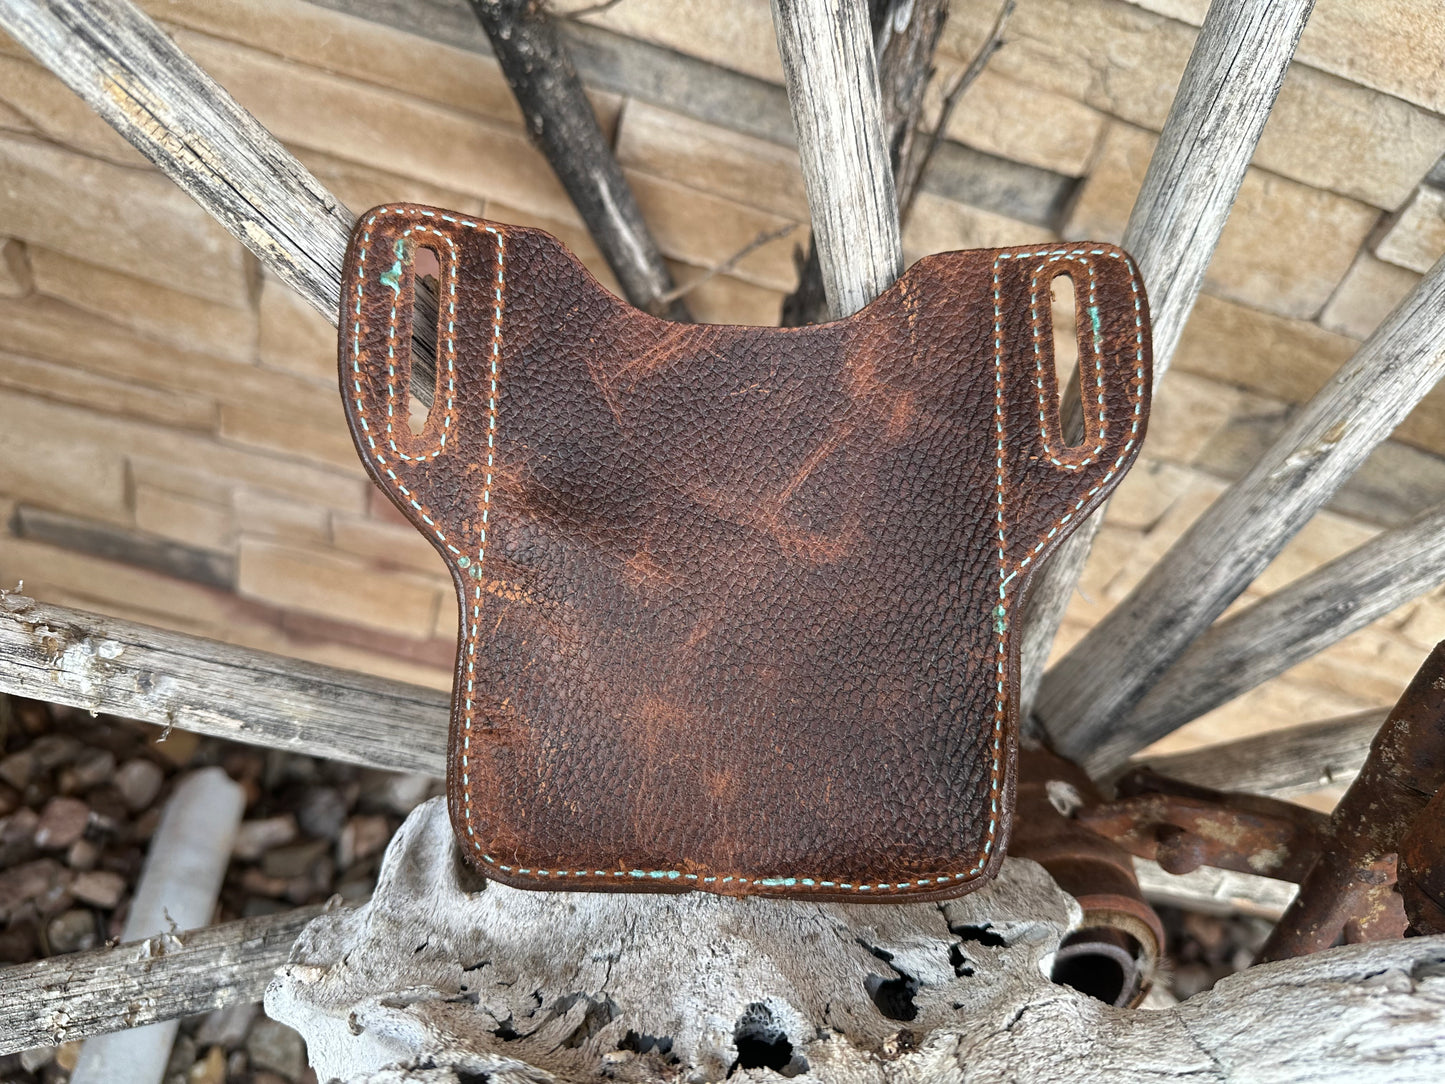 Southwest tooled leather desert cactus cell phone holster